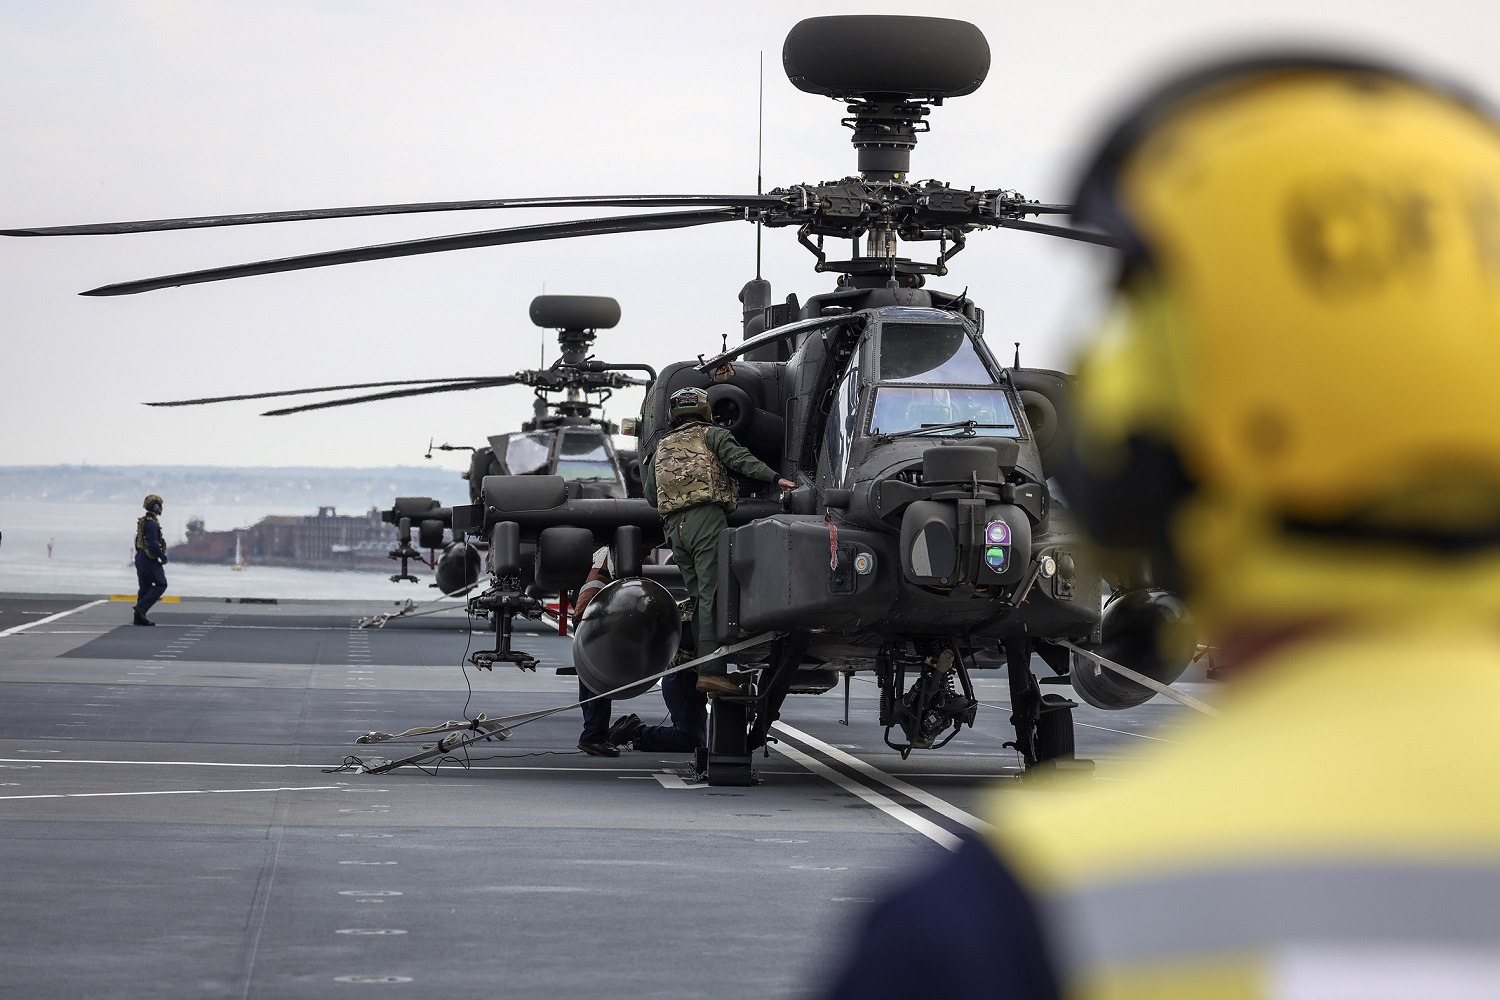 Three Apache helicopters from 656 Squadron, 4 Regiment Army Air Corps land on HMS Prince Of Wales flight deck.